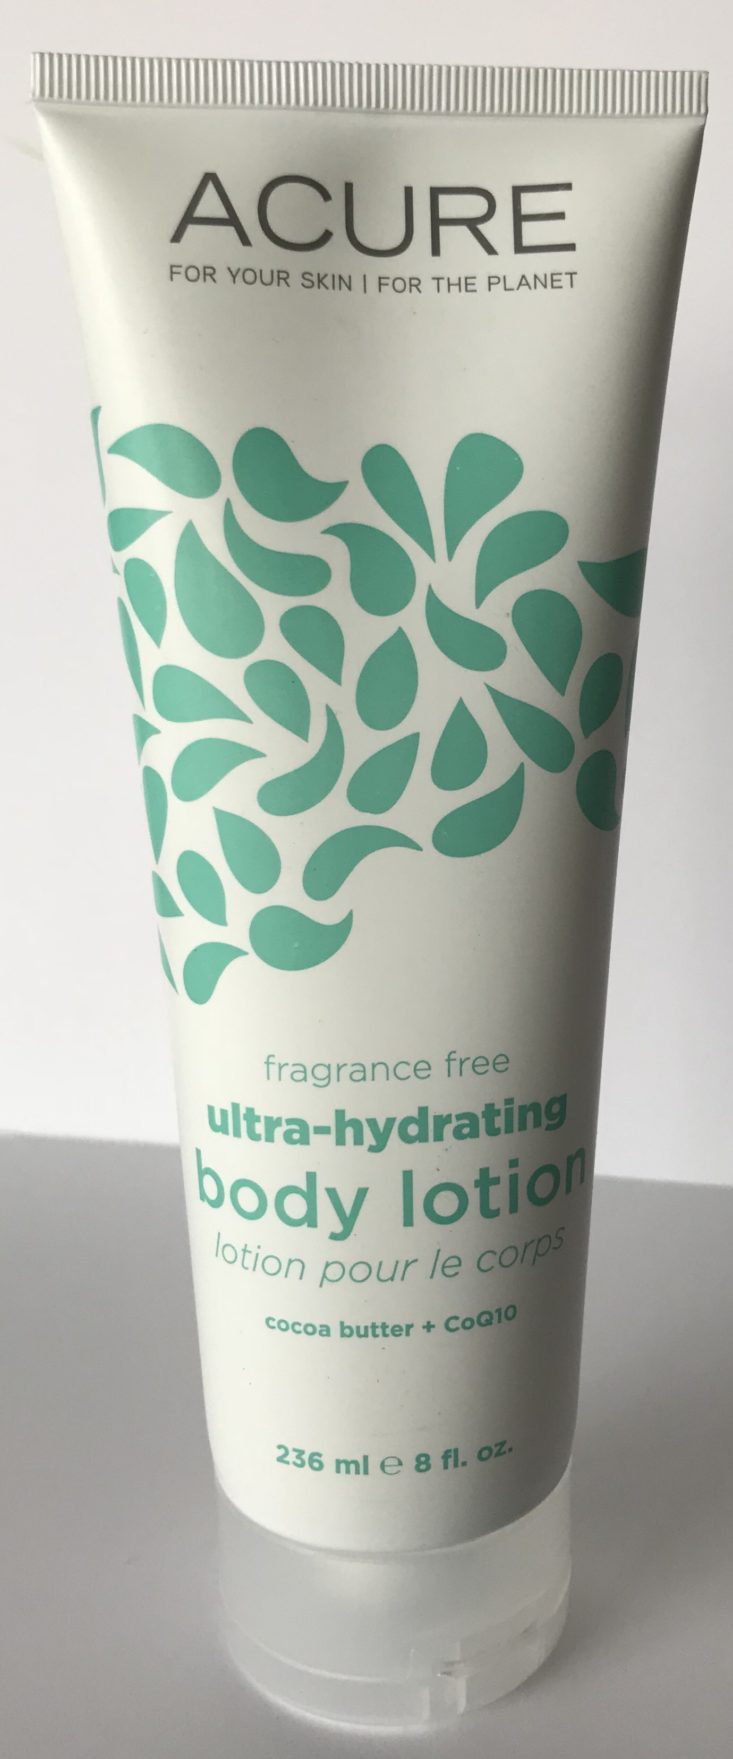 Acure Fragrance-Free Ultra-Hydrating Body Lotion 8 oz.